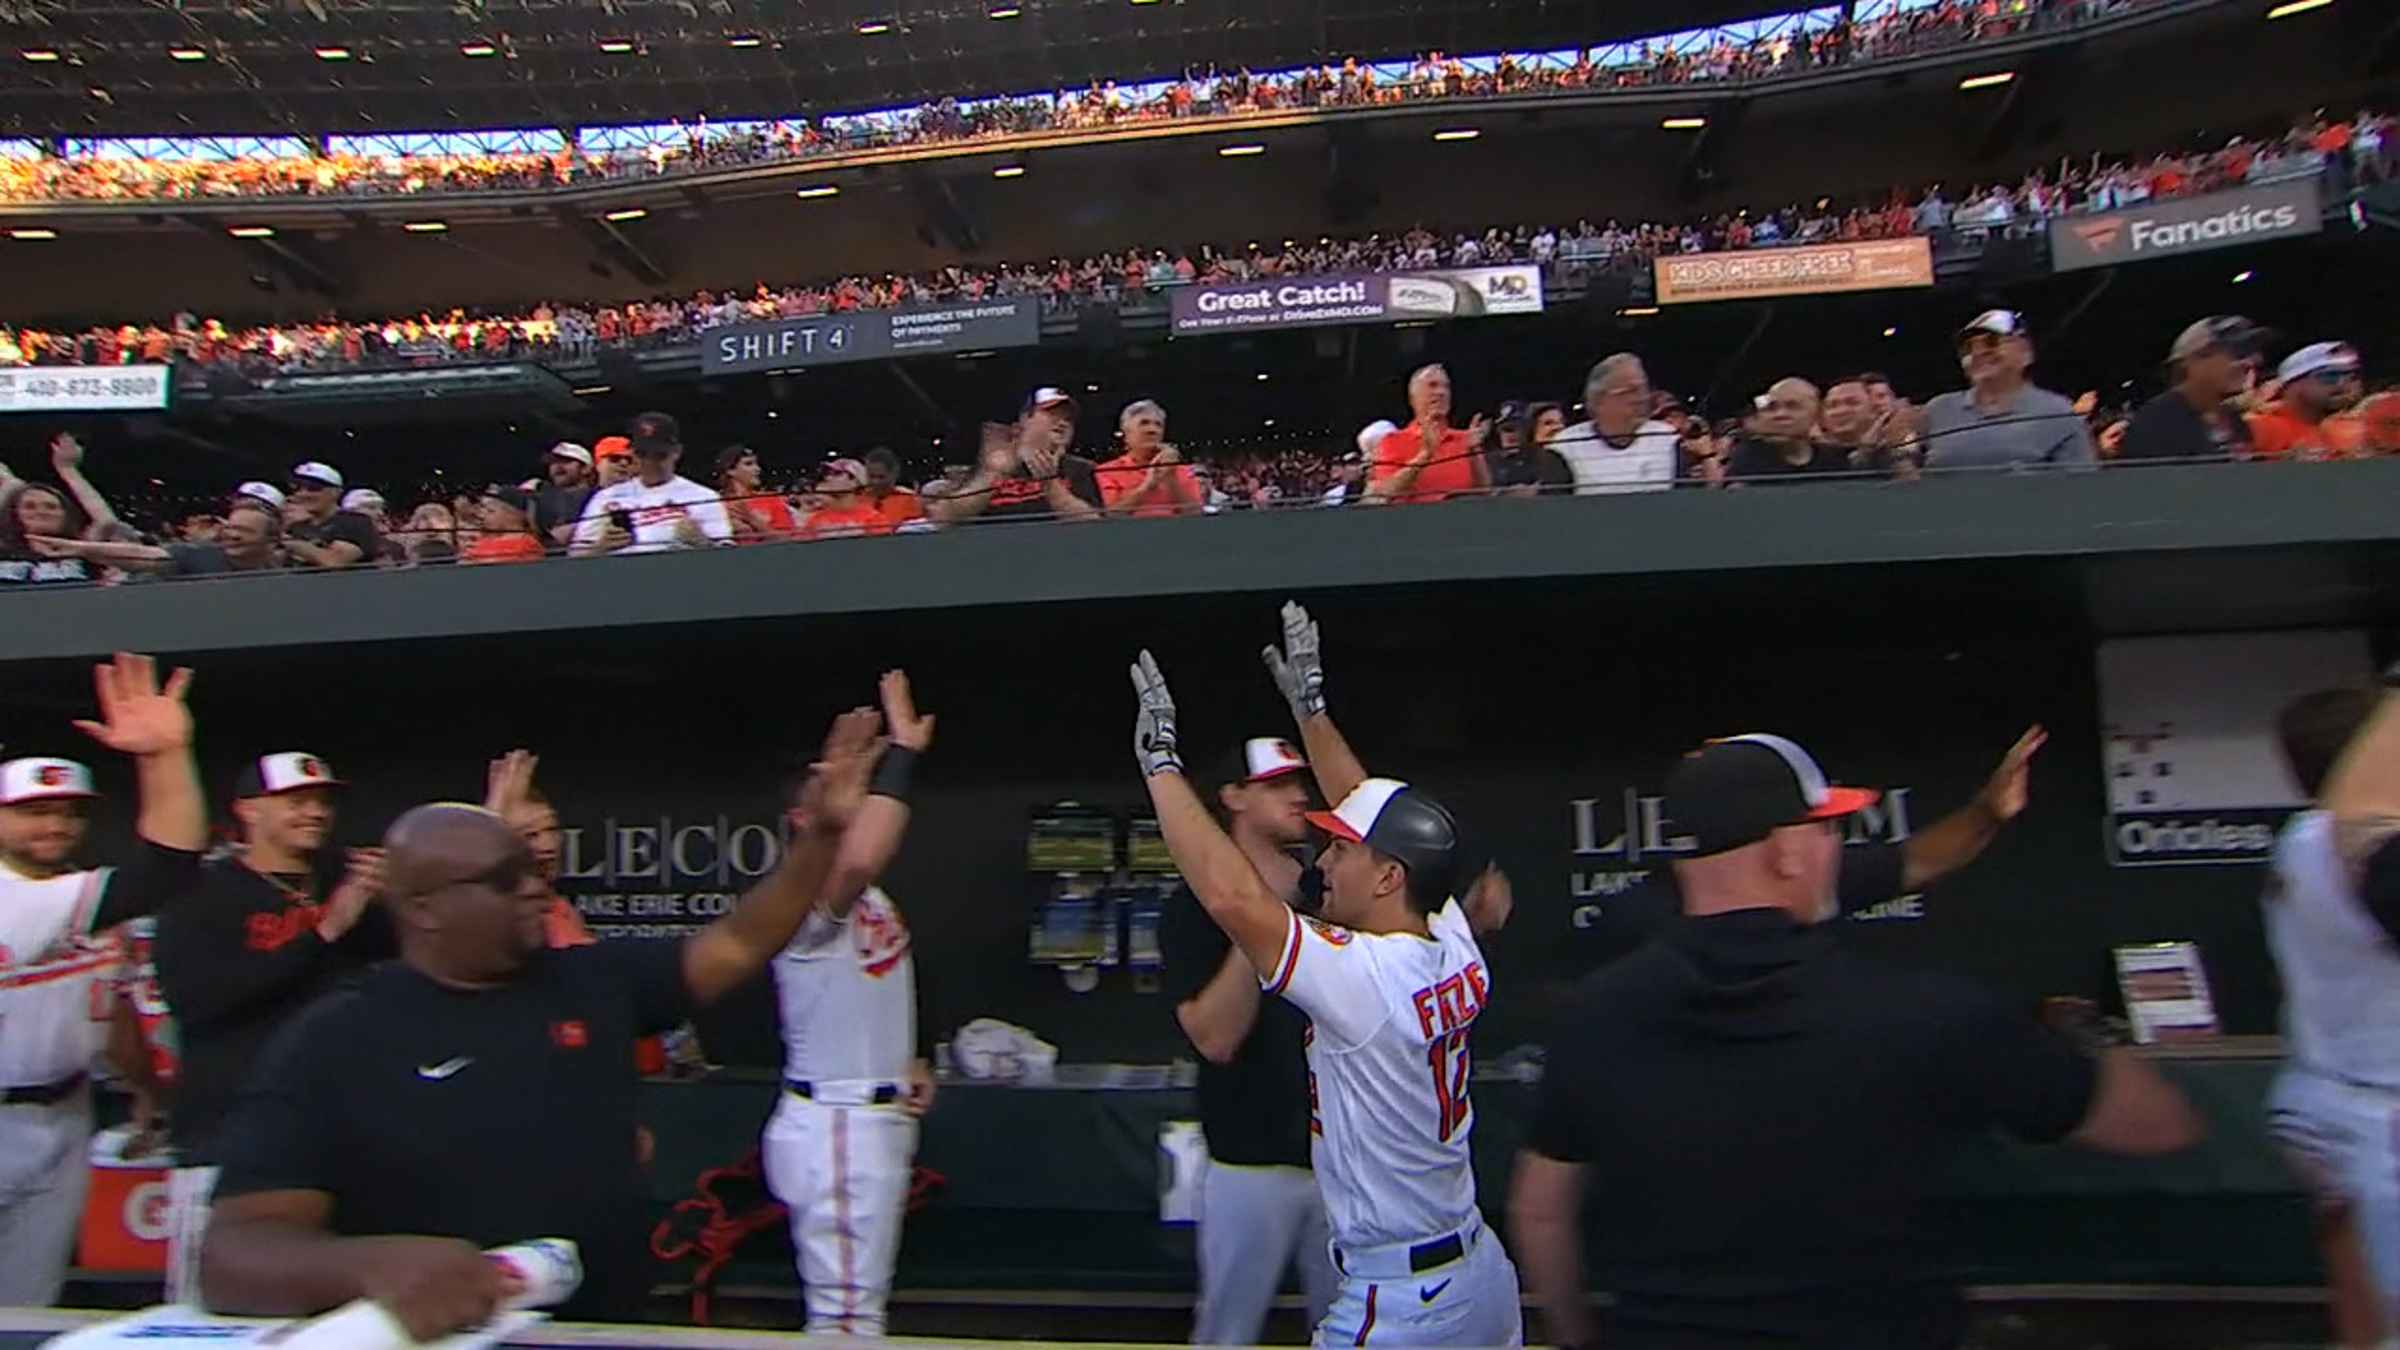 Orioles score 7 runs in 1st inning, pound the Yankees 9-3